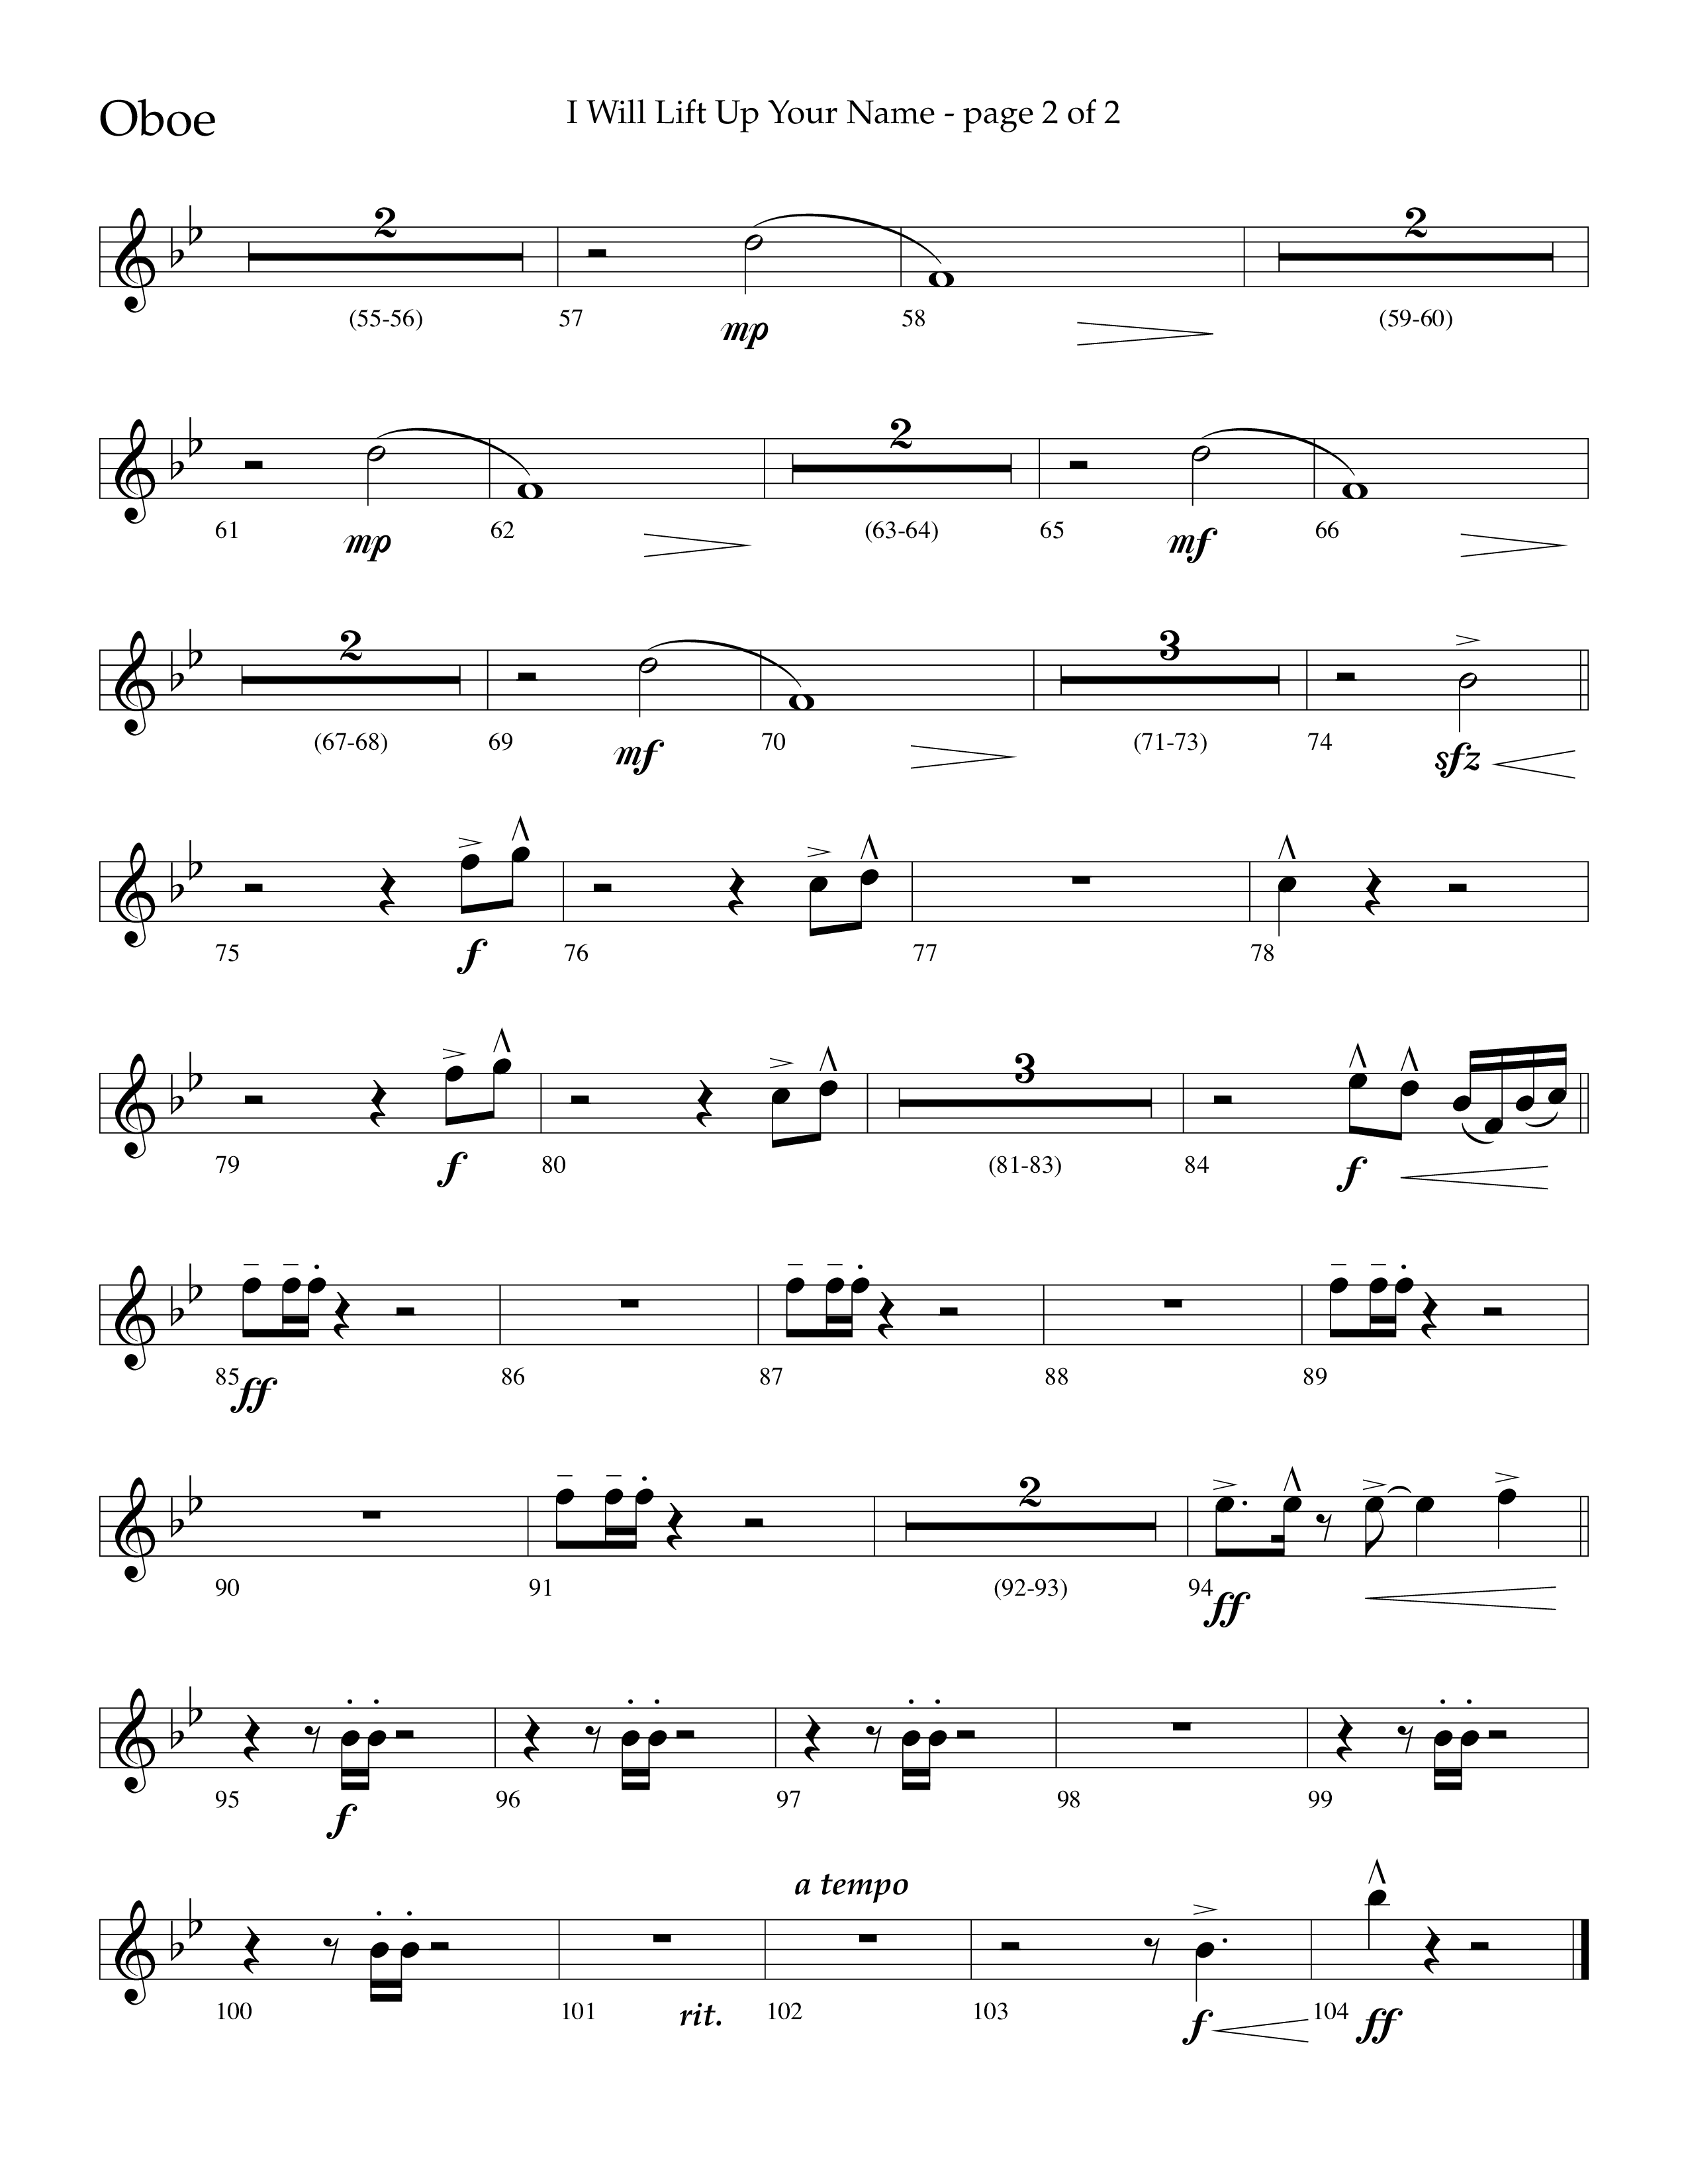 I Will Lift Up Your Name (Choral Anthem SATB) Oboe (Lifeway Choral / Arr. John Bolin / Orch. Cliff Duren)